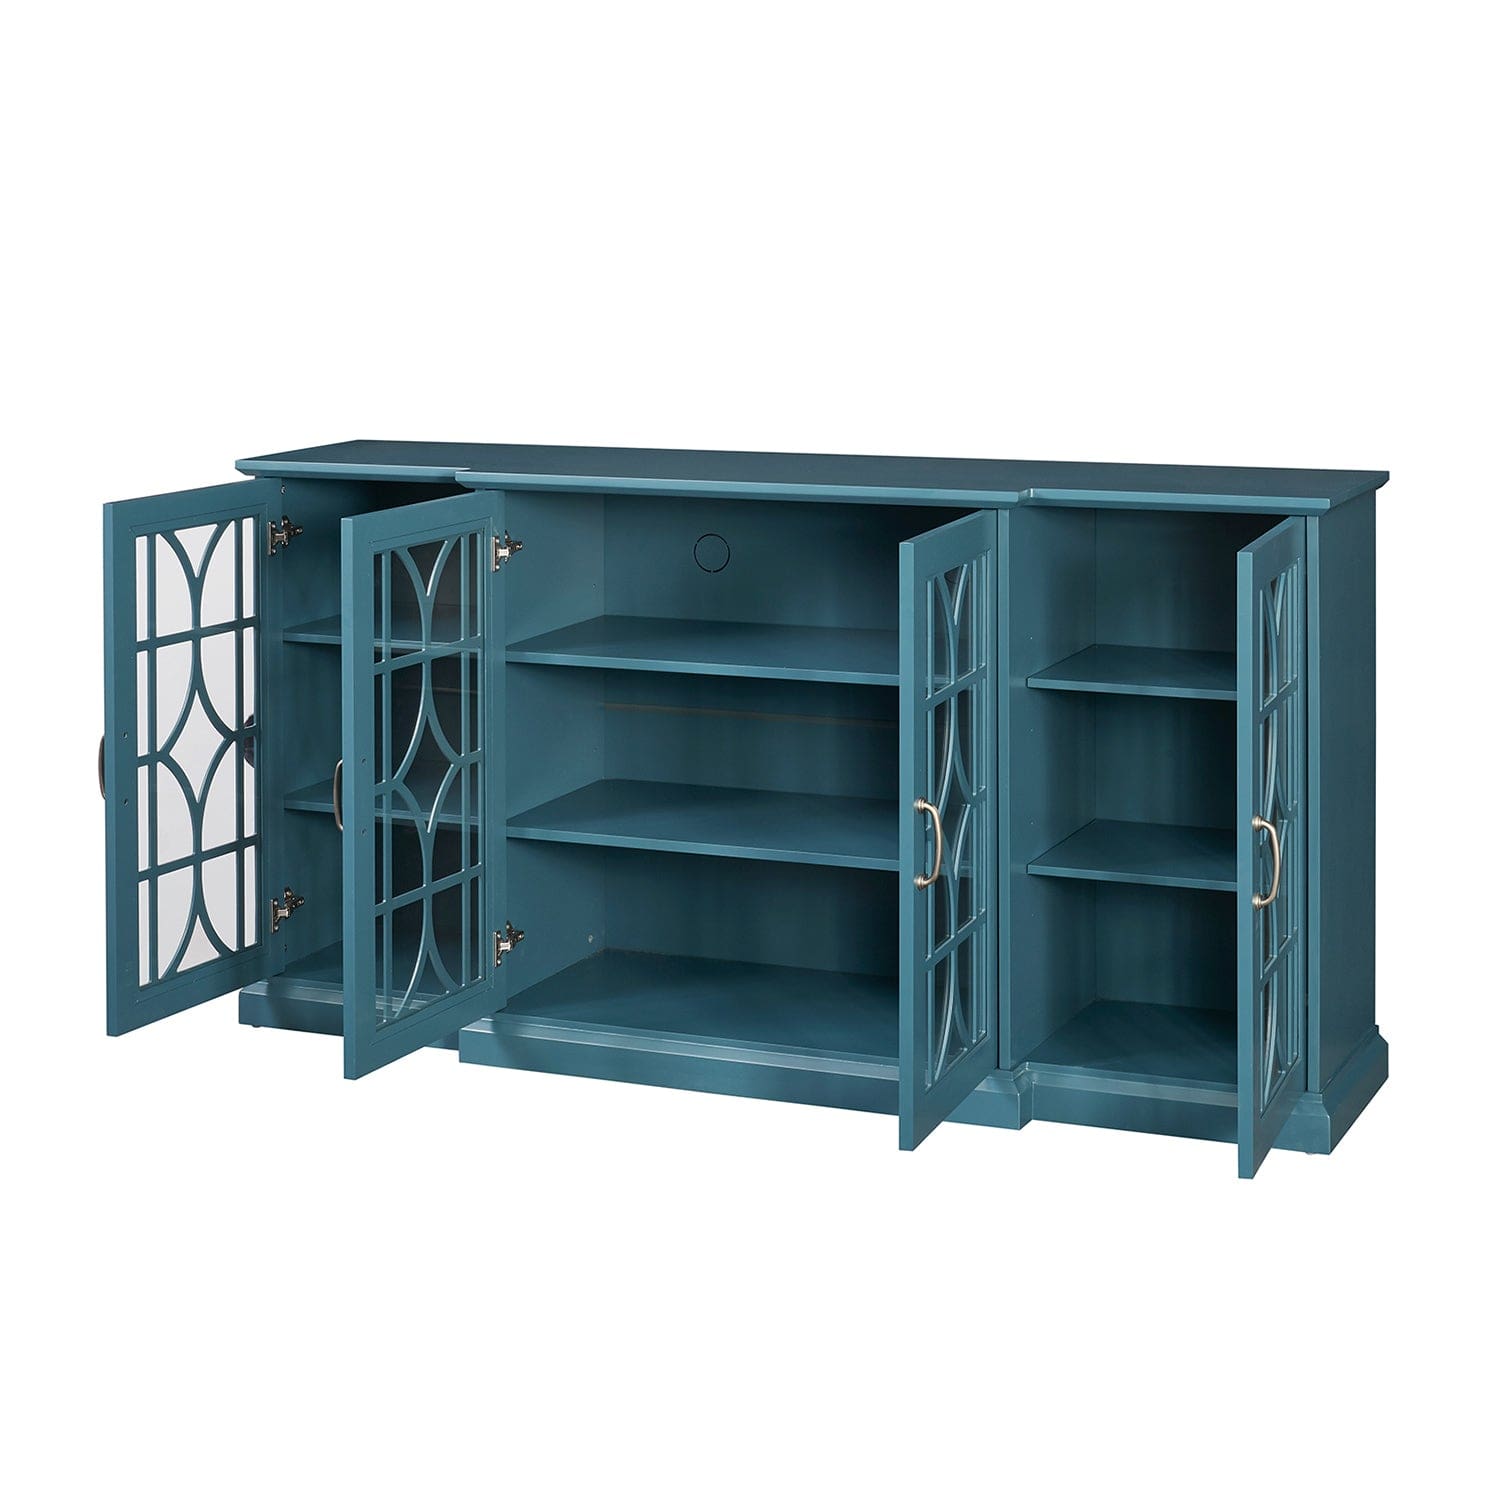 1st Choice Furniture Direct TV Stand 1st Choice Teal Blue 63" TV Stand with Glass Door & Adjustable Shelves